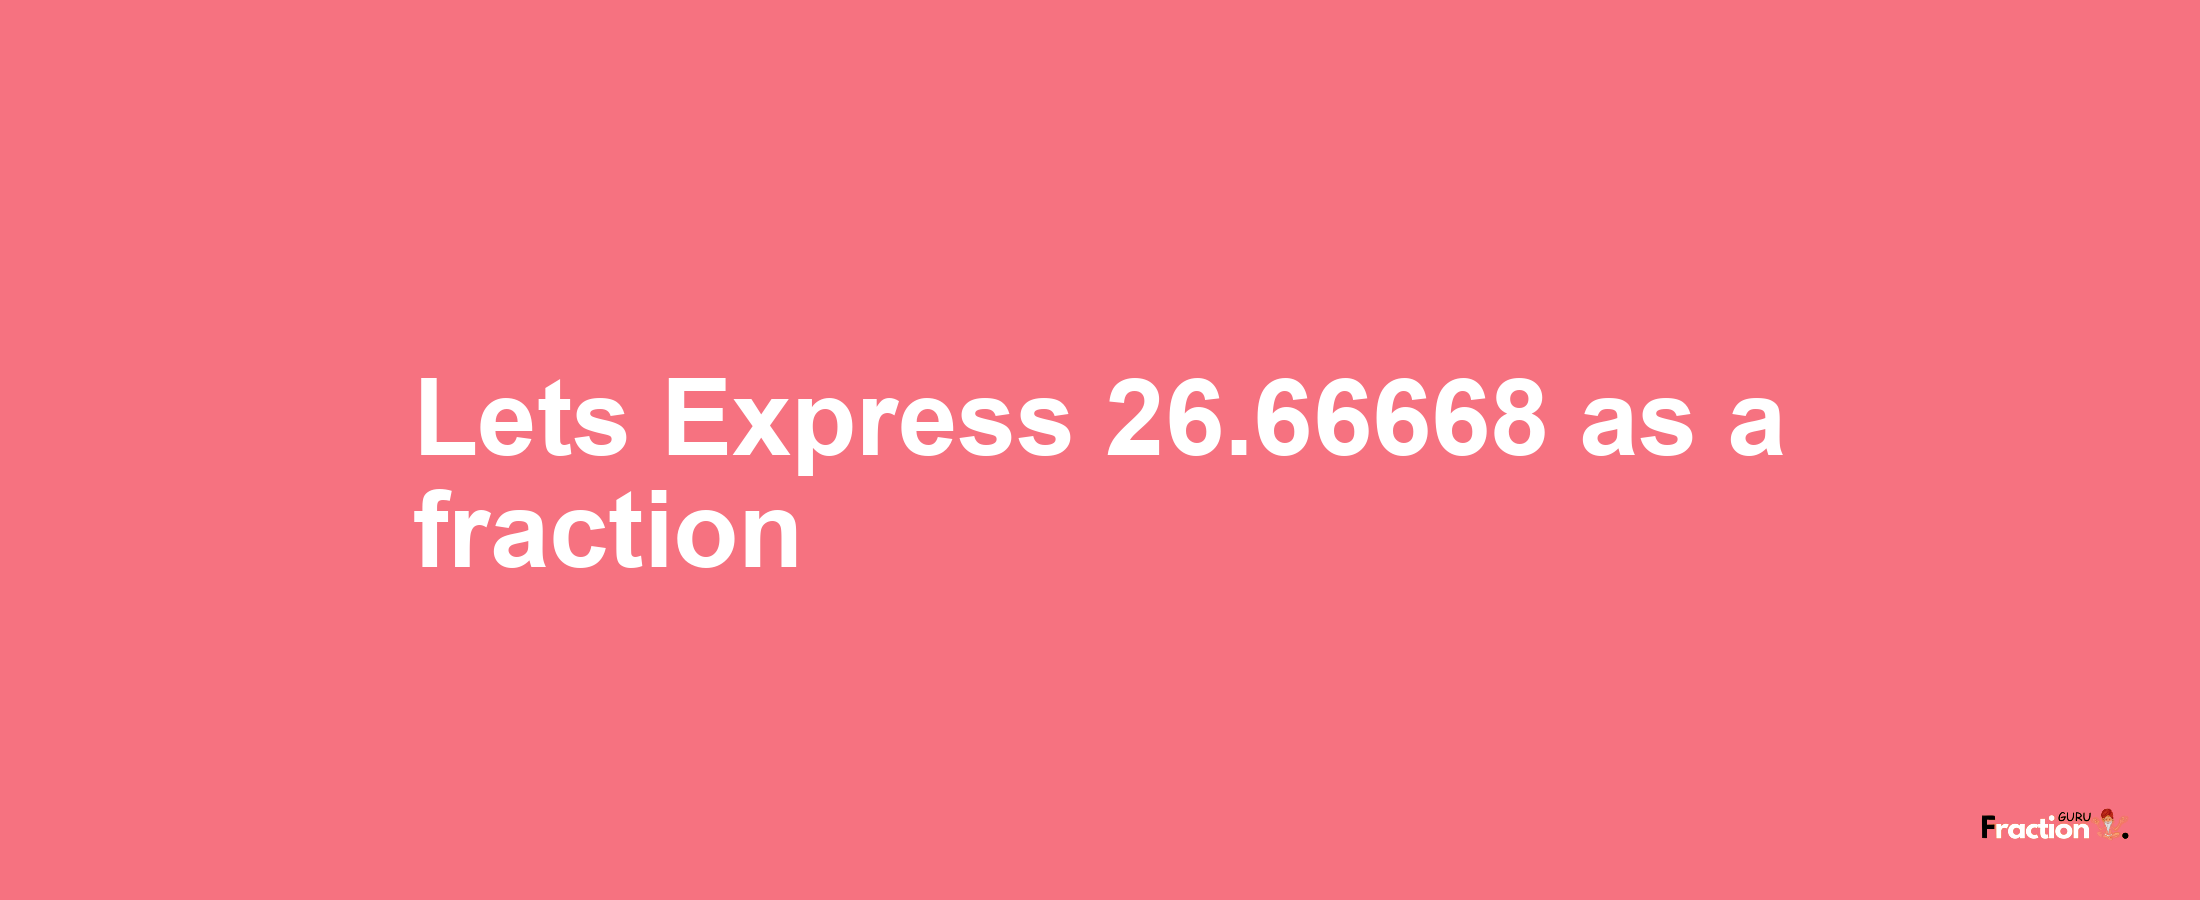 Lets Express 26.66668 as afraction